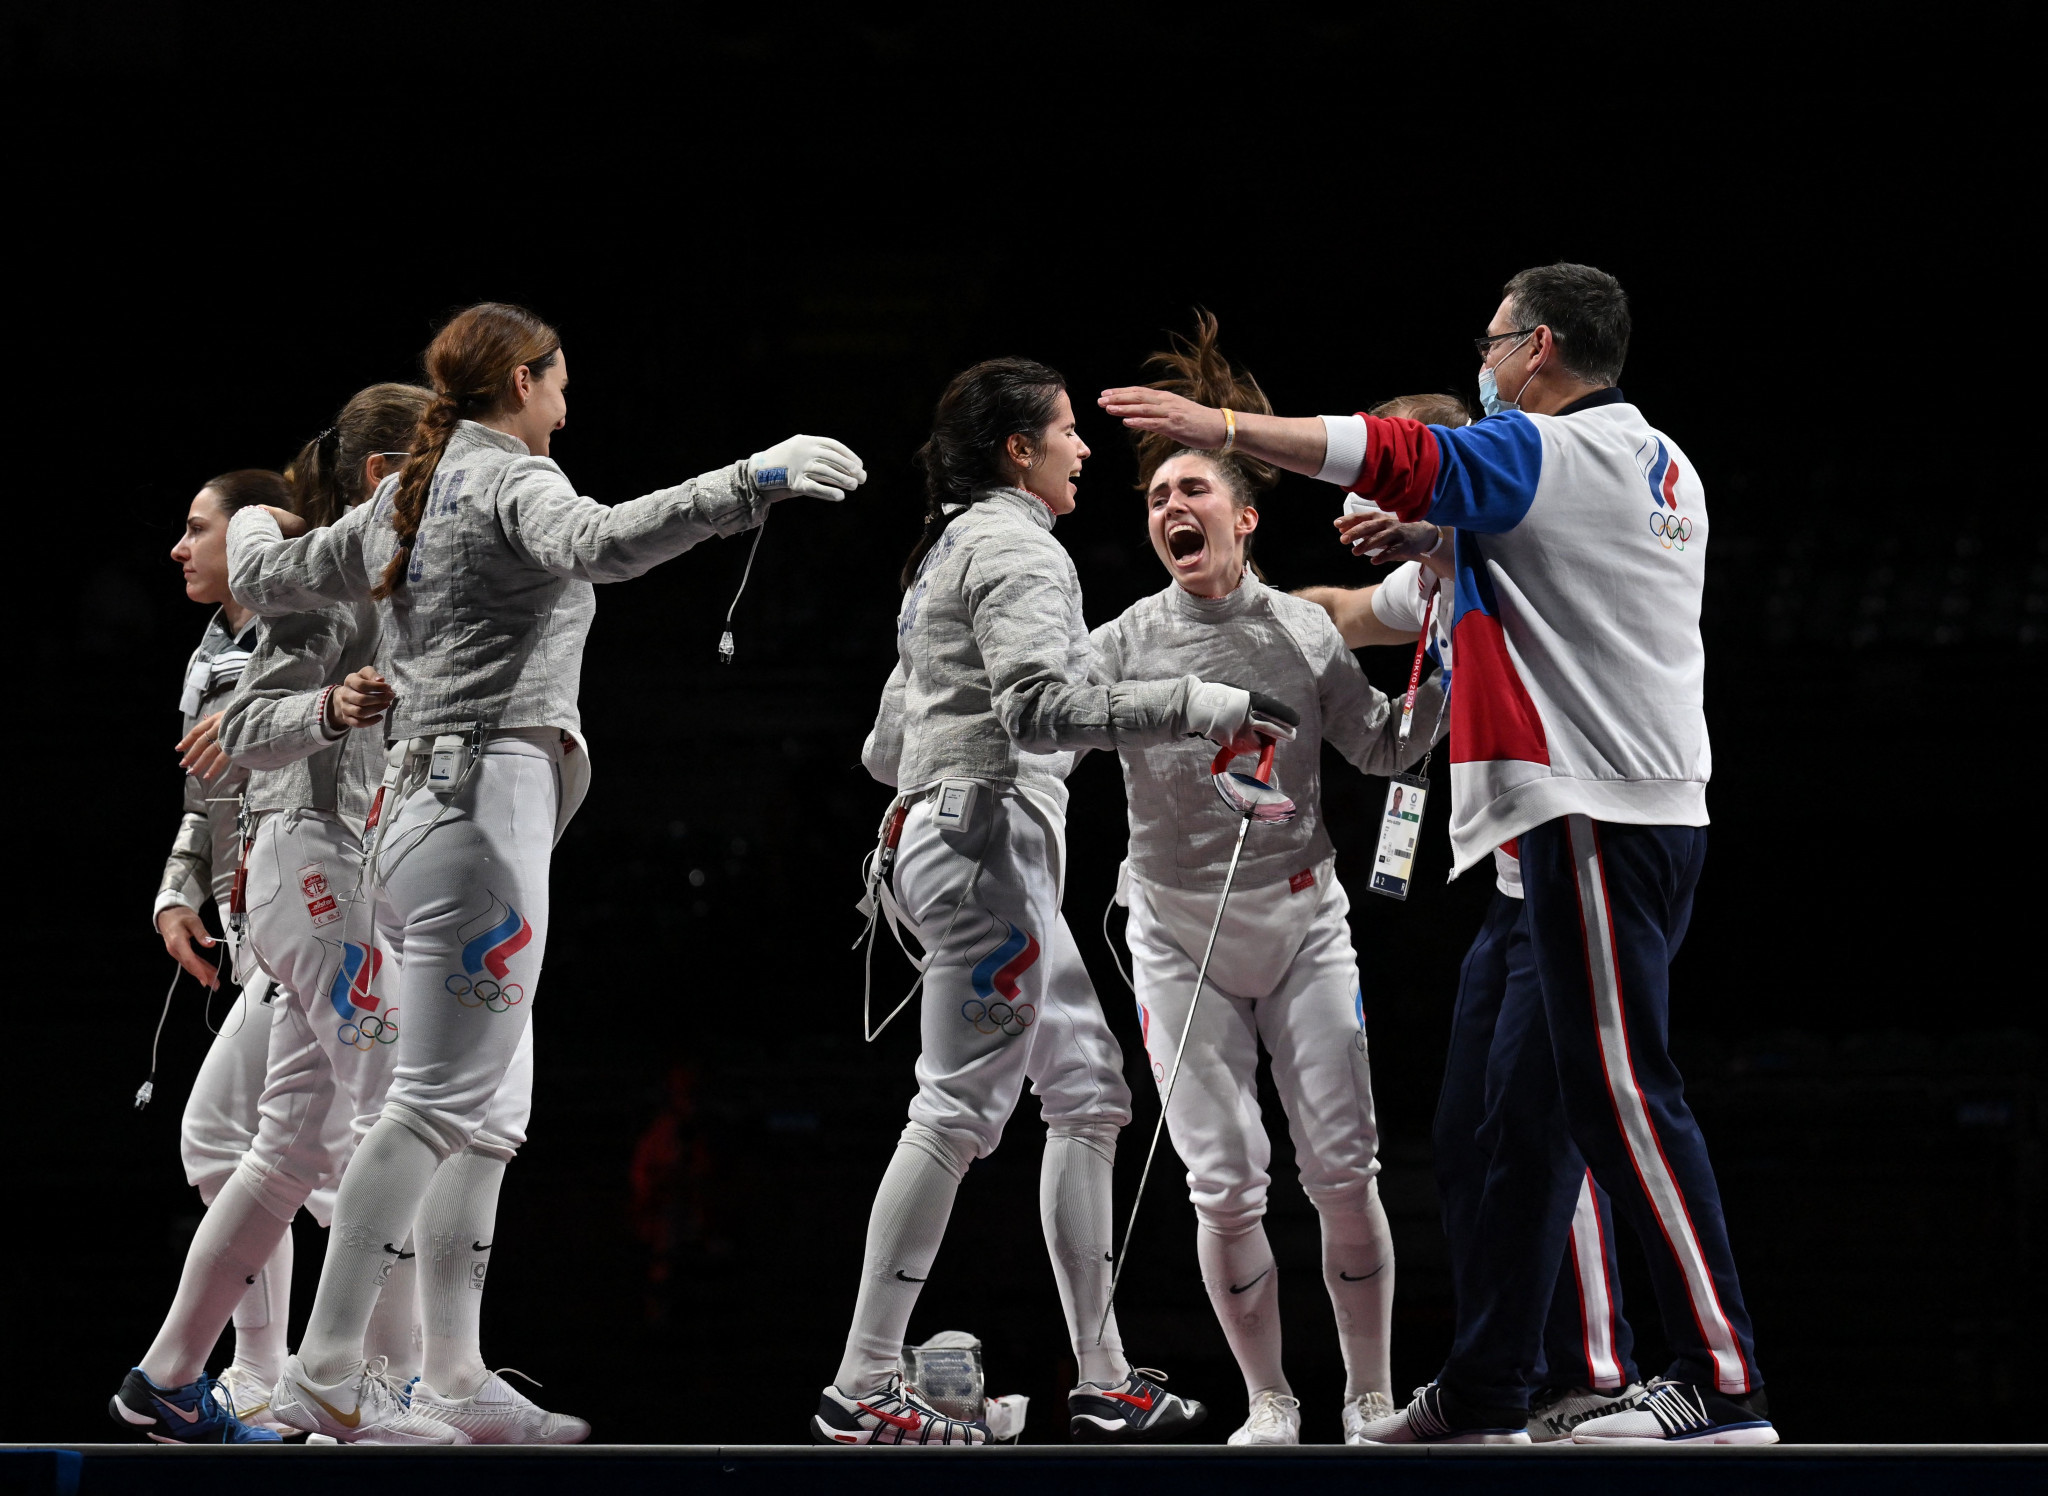 The FIE is carrying out checks on Russian fencers to ensure compliance with conditions of neutrality and individual eligibility ©Getty Images